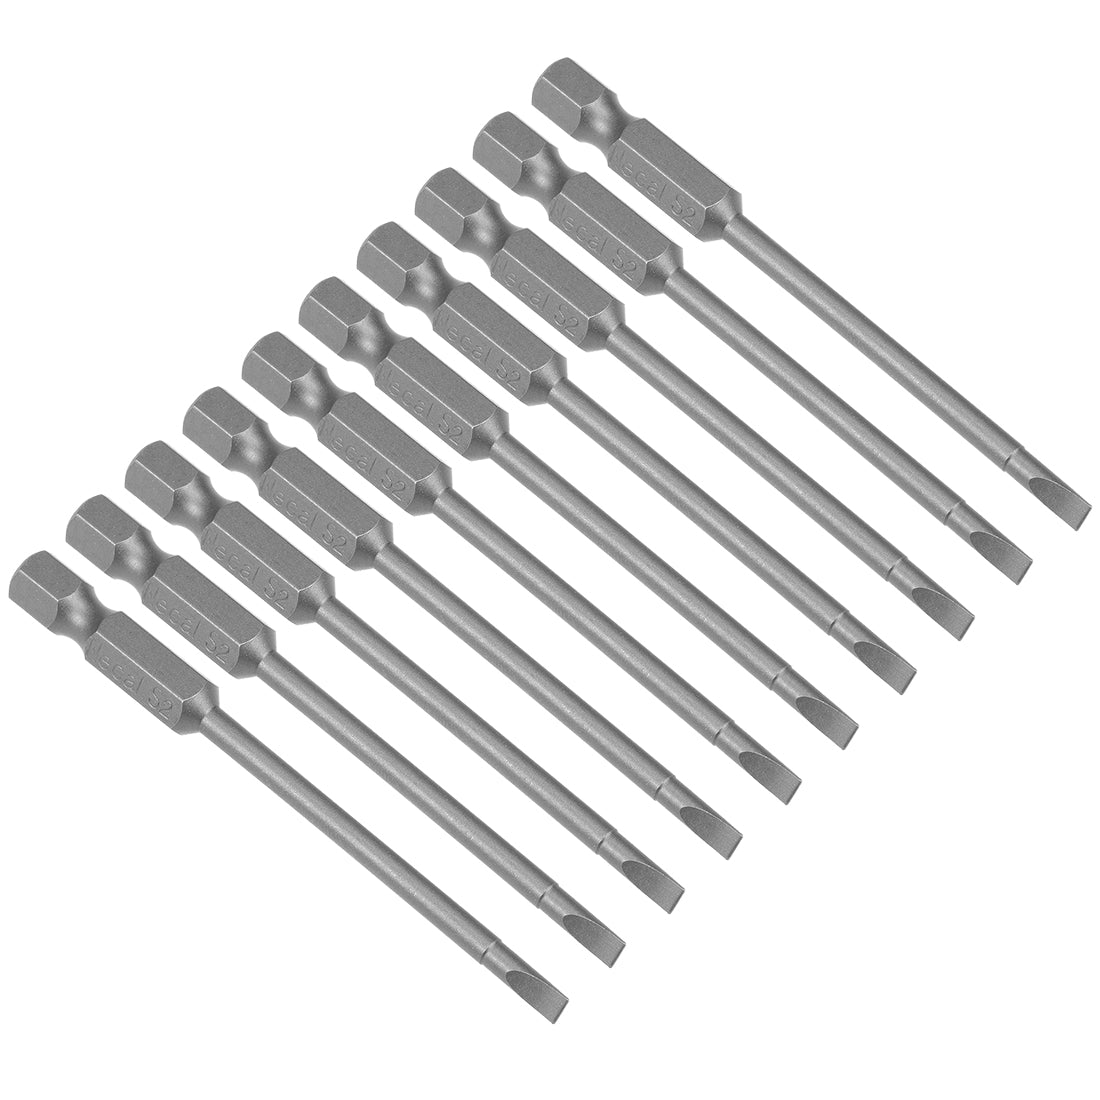 Uxcell Uxcell 10 Pcs 6mm Slotted Tip Magnetic Flat Head Screwdriver Bits, 1/4 Inch Hex Shank 2.5-inch Length S2 Power Tool